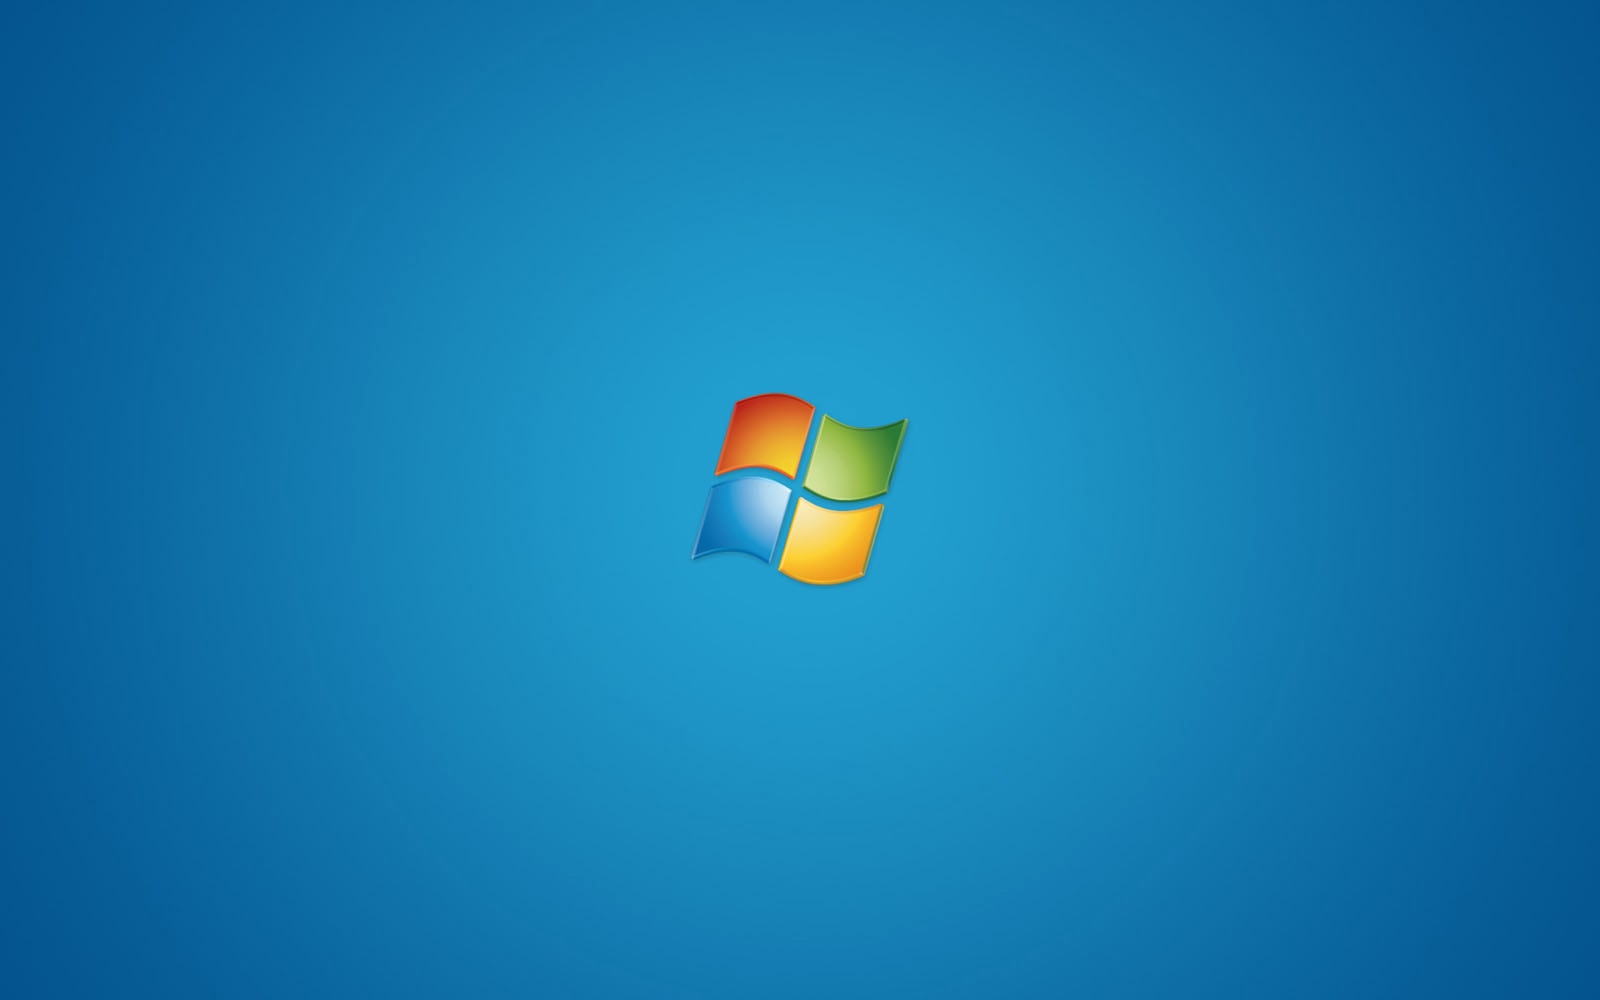 Tag Microsoft Windows Wallpapers BackgroundsPhotos Images and